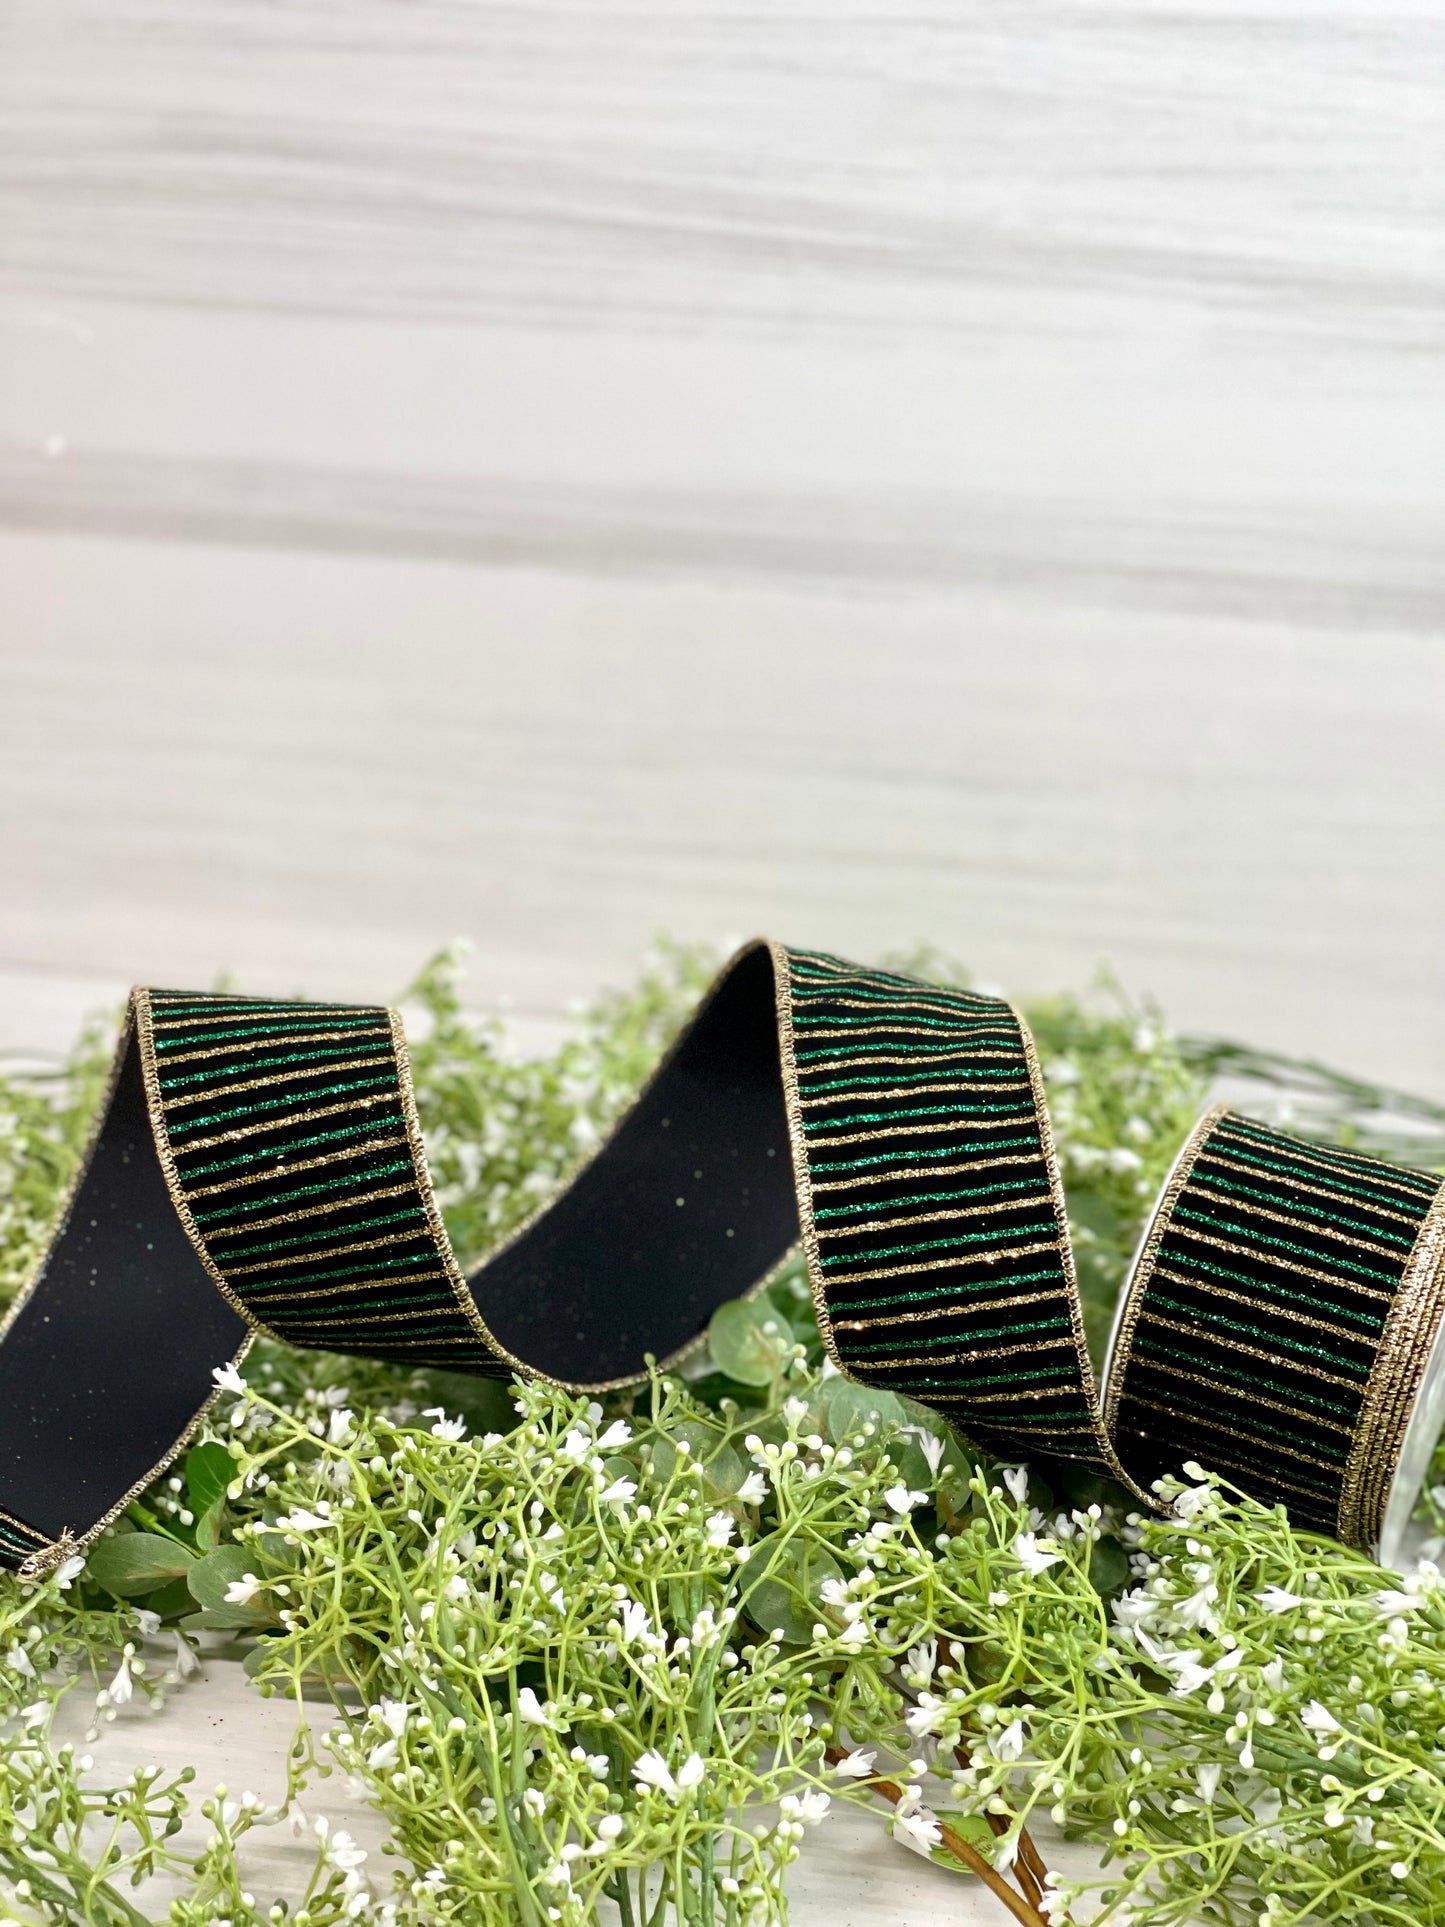 2.5 Inch By 10 Yard Black Velvet With Green And Gold Striped Ribbon